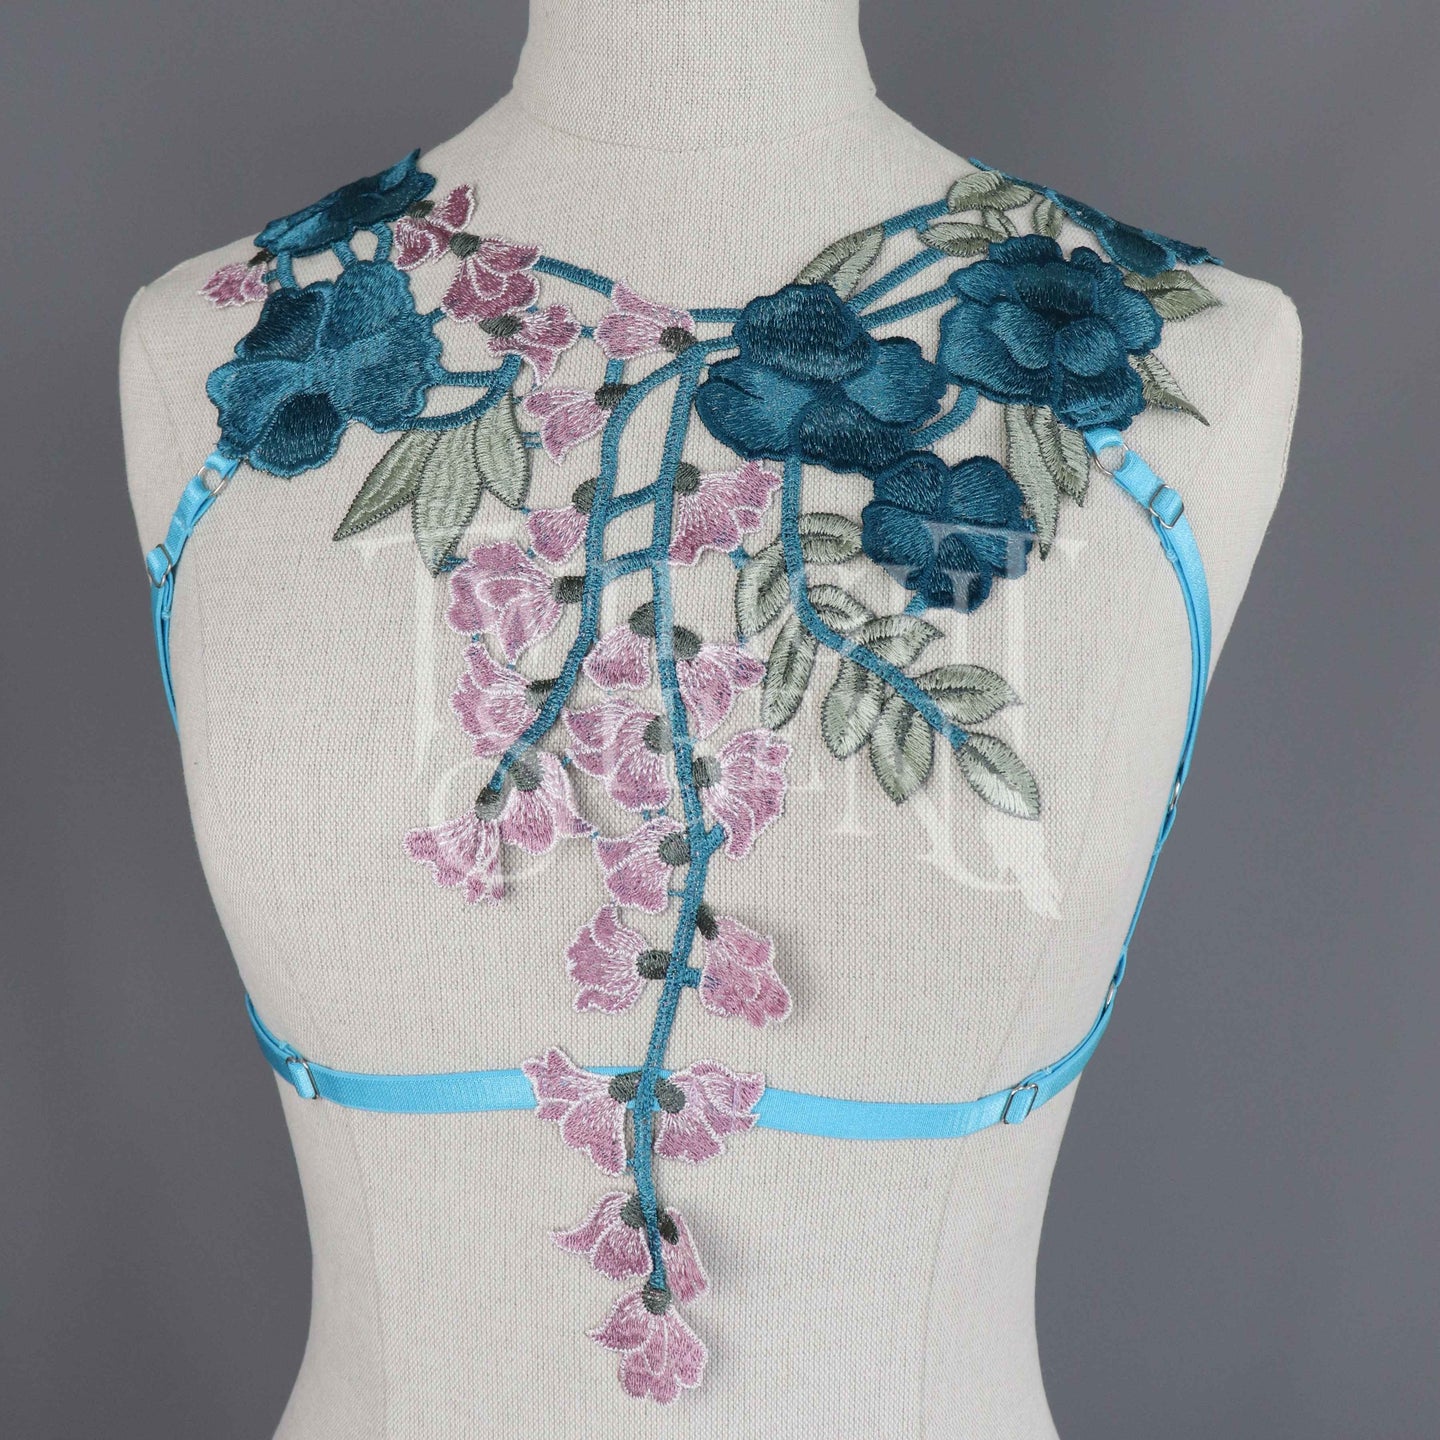 TEAL PEACOCK BLUE LACE BODY HARNESS BRALET - SIZE SIZE~ XSMALL- UK 4-6 // US 0-2 (FITS RIBCAGE 24